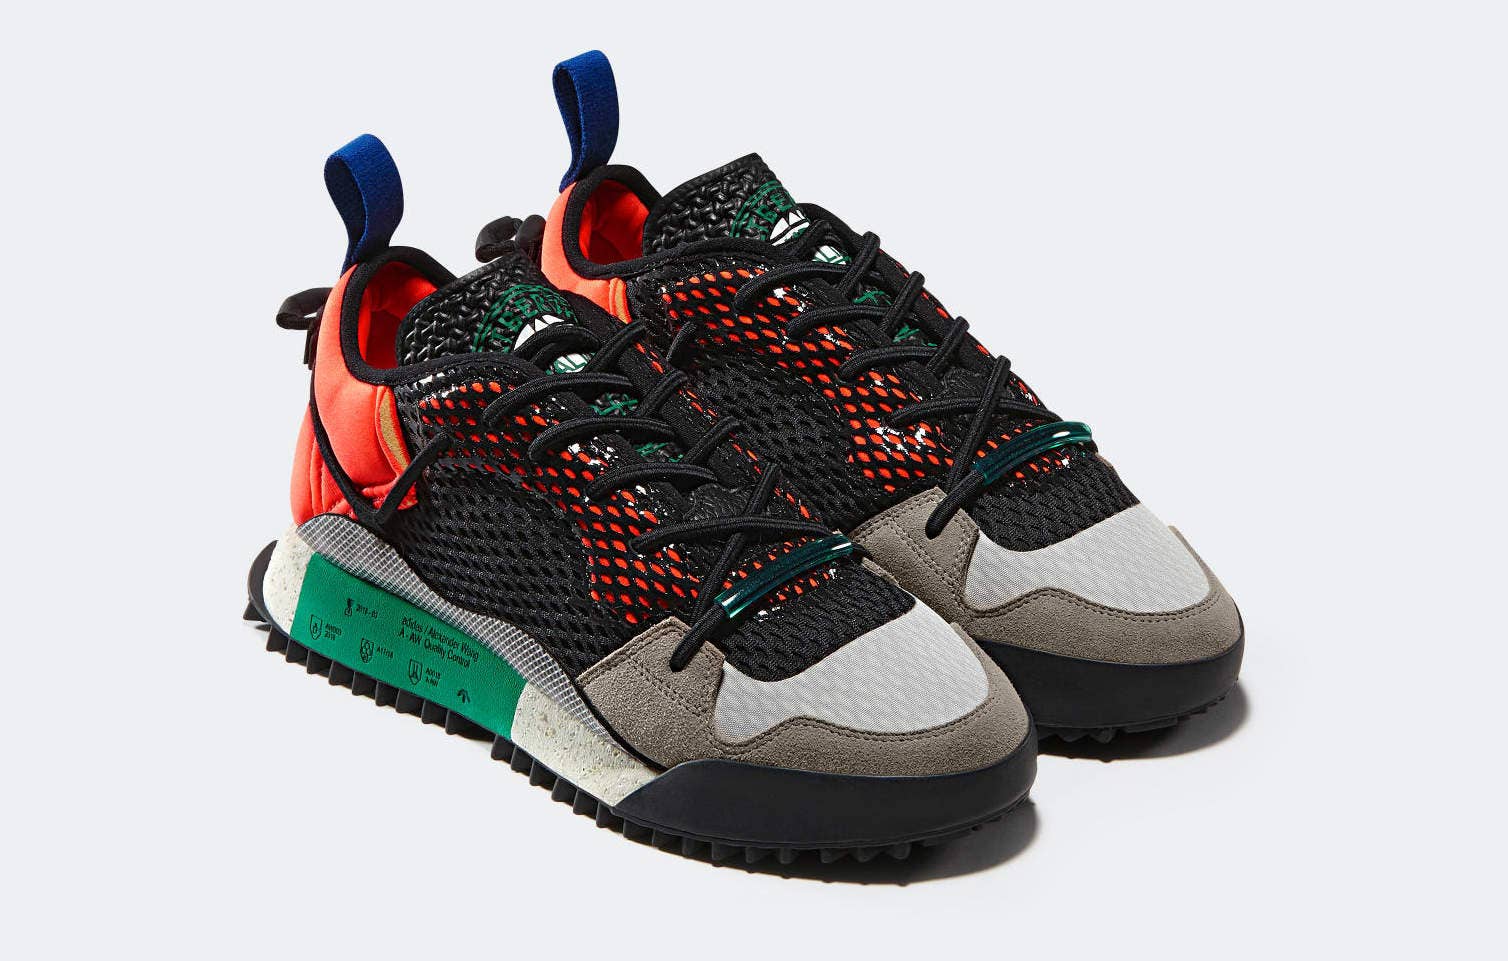 Trolley Okkernoot Plasticiteit Alexander Wang and Adidas Originals Made Their Craziest Sneakers Yet |  Complex